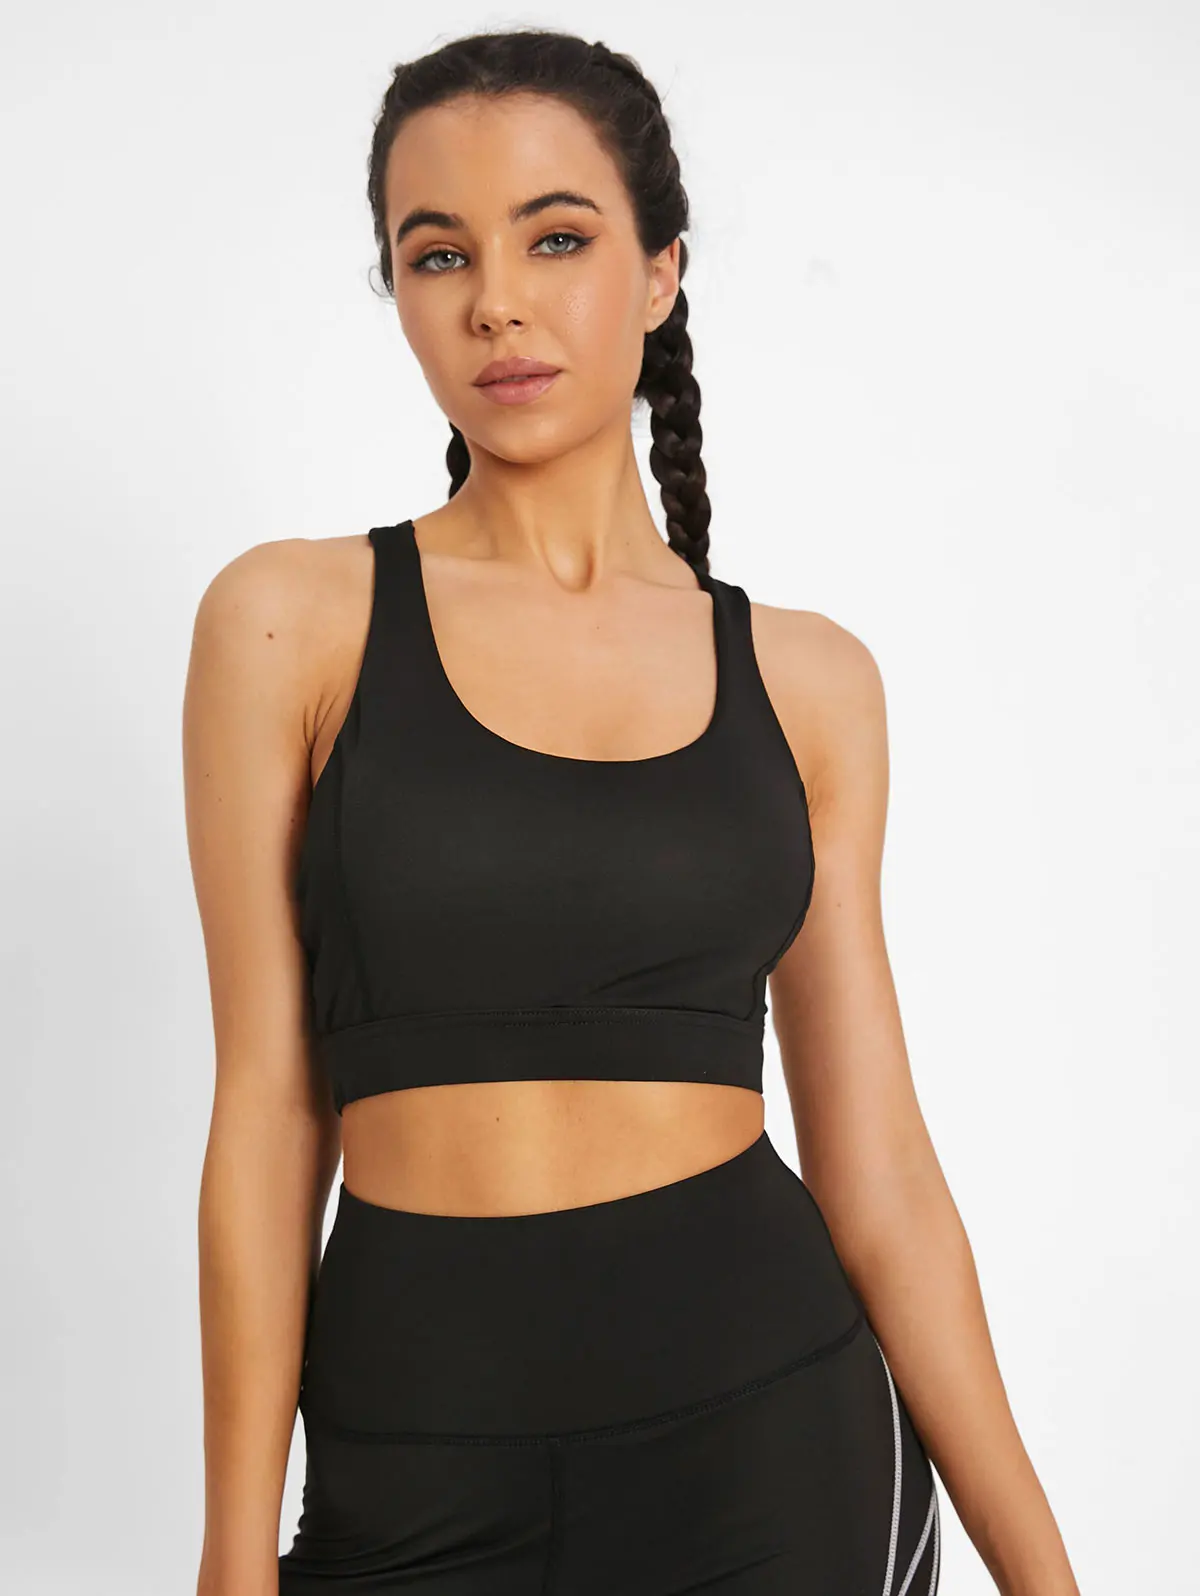 https://ae01.alicdn.com/kf/S97e431b162604d5d90c4cdd40de5426aw/ZAFUL-Solid-Criss-Cross-Cut-Out-Back-Sports-Bra-Women-Gym-Top-Athletic-Activewear.jpg